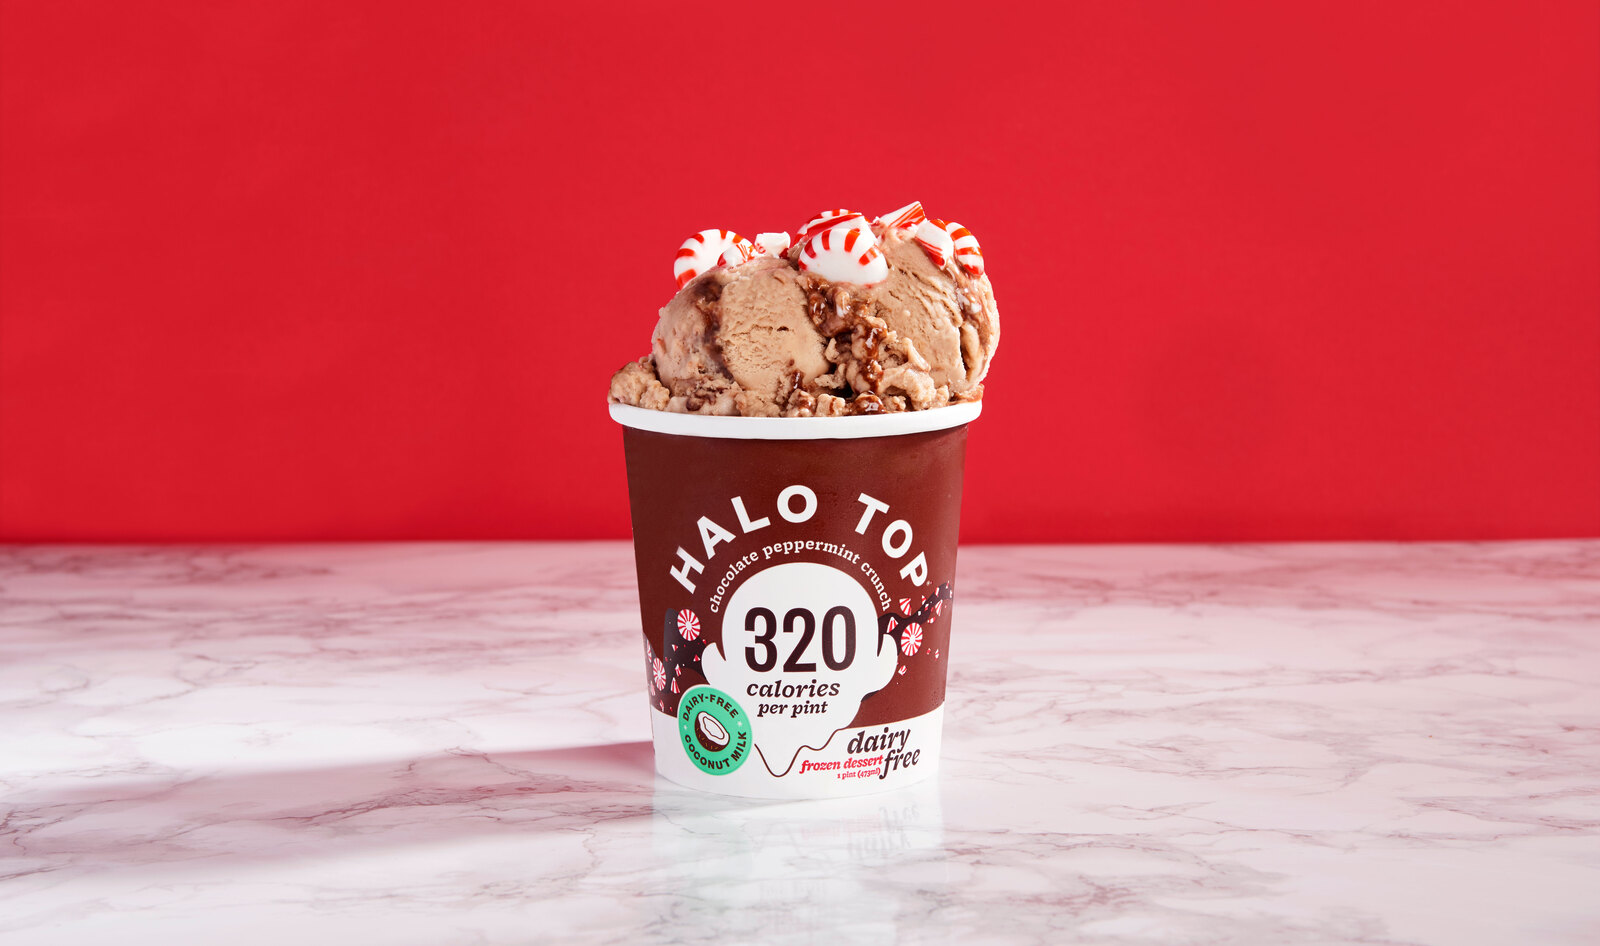 Halo Top Launches Vegan Peppermint Ice Cream for Christmas&nbsp;